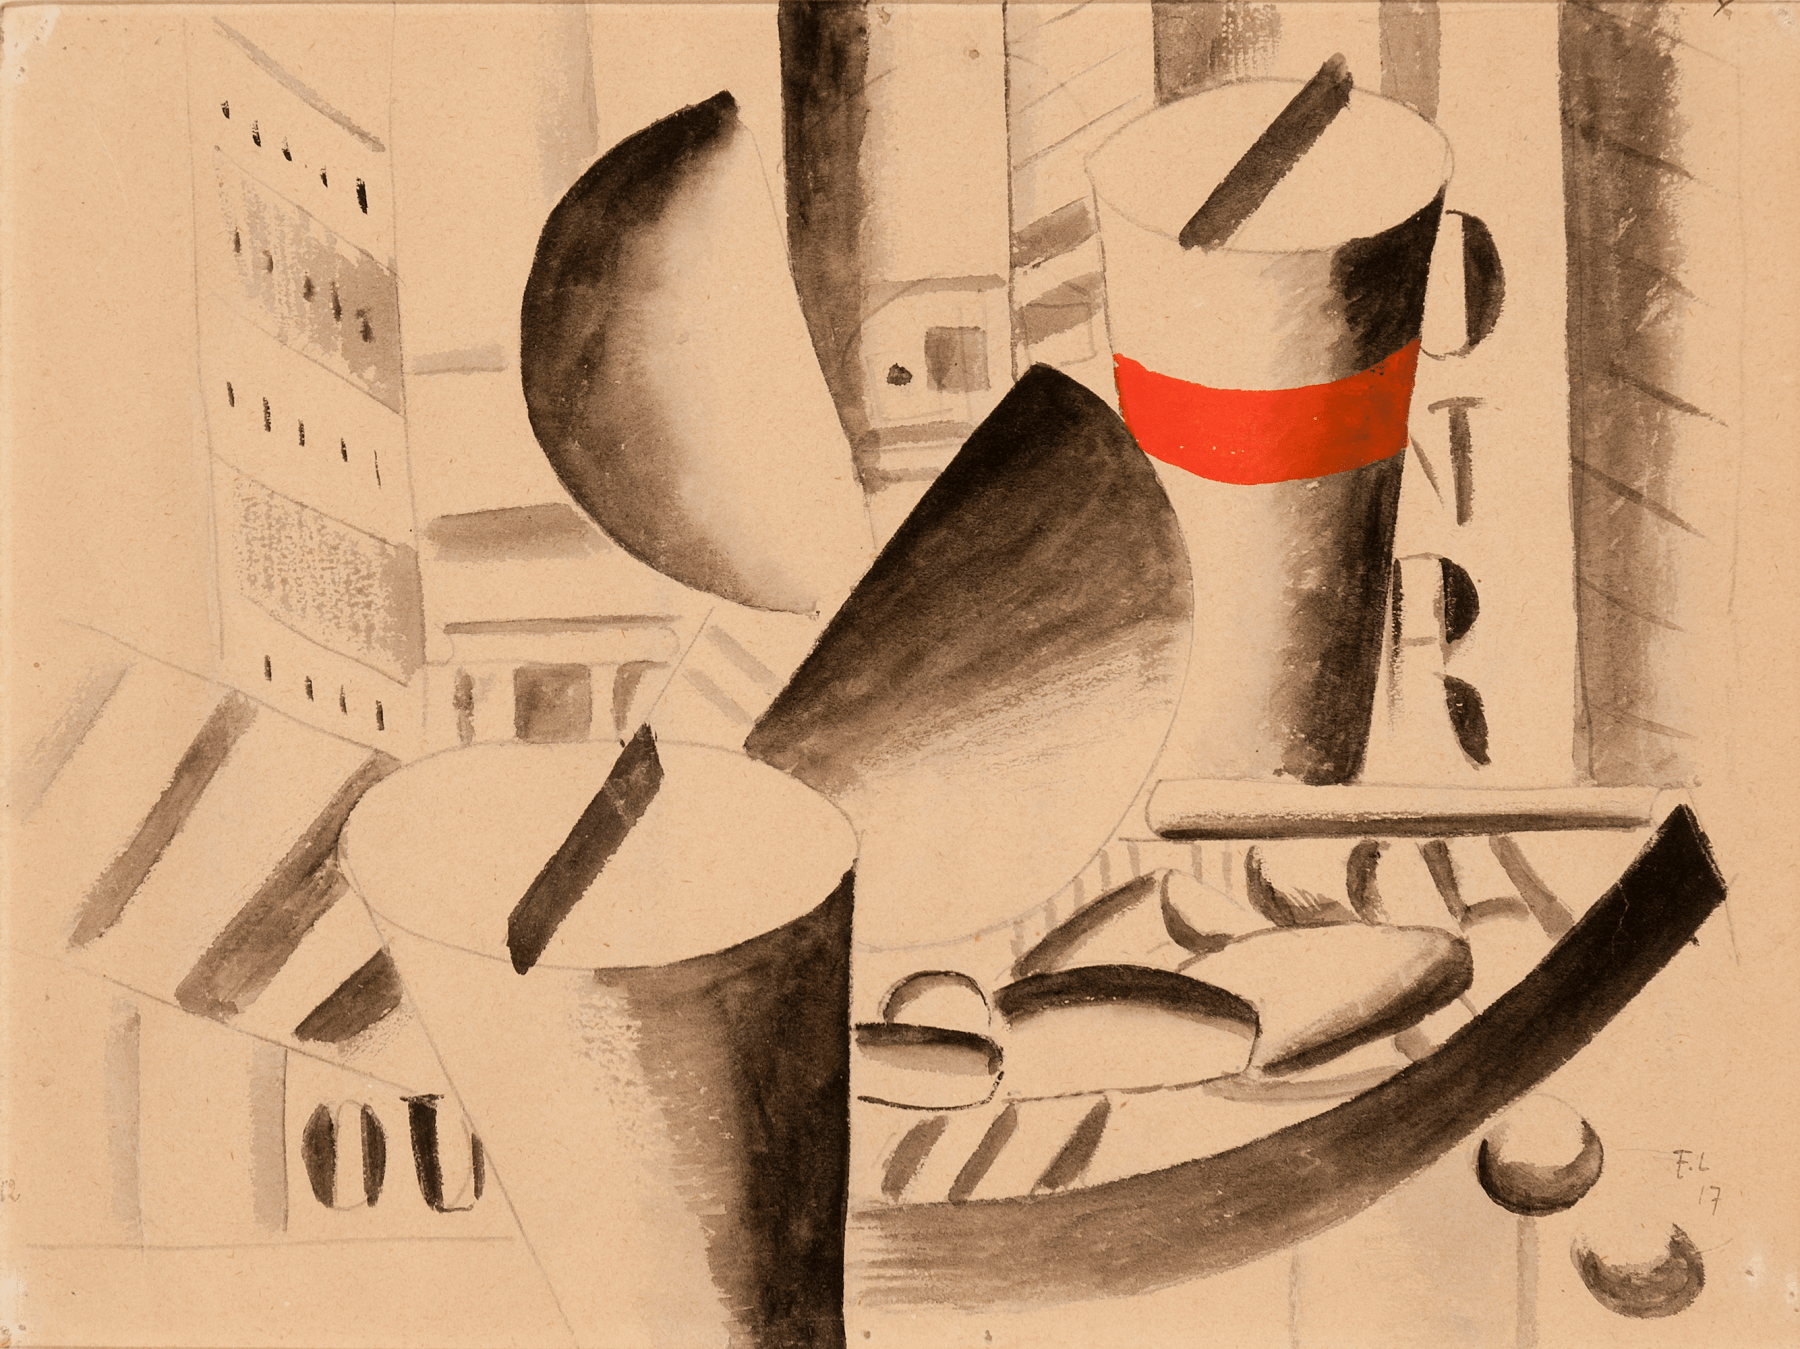 Fernand L&eacute;ger, &Eacute;tude pour Le Remorqueur, 1917 Gouache and ink over pencil on paper mounted on board 23.2 x 30.7 cm. (9 1/4 x 12 1/4 in.) &copy;Helly Nahmad Gallery NY